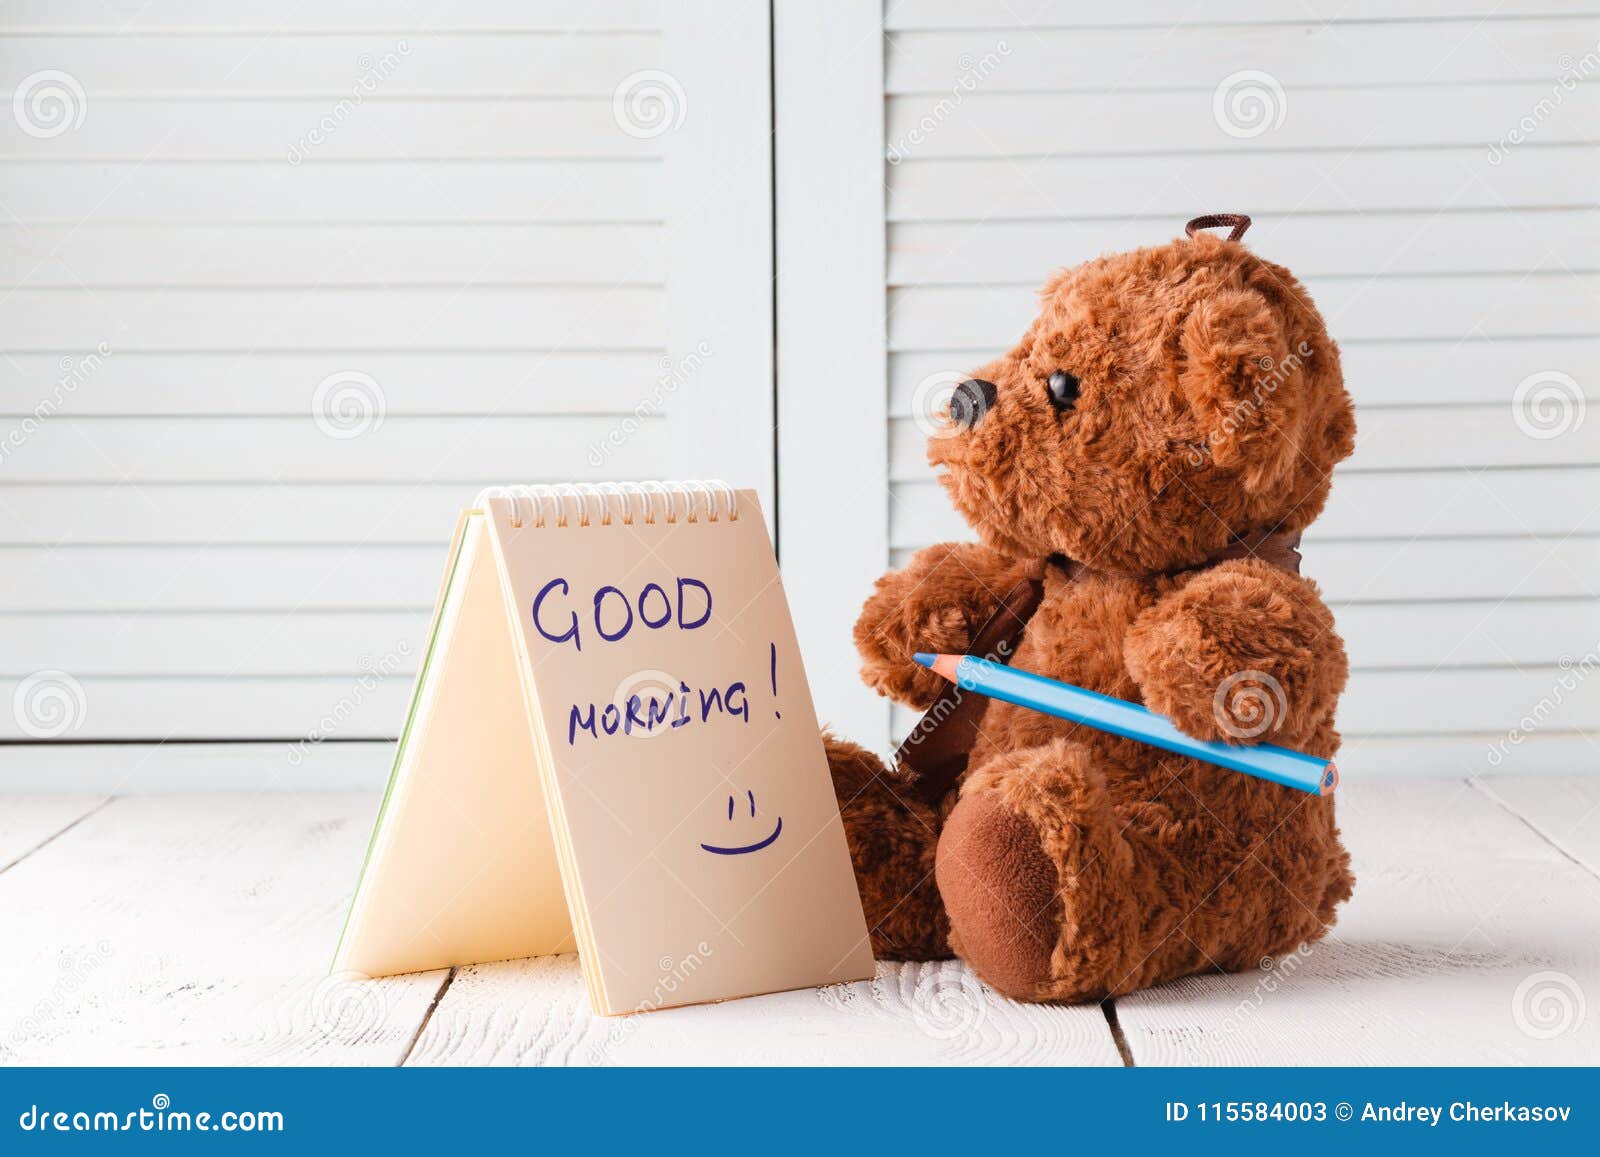 Good Morning with Teddy Bear Stock Image - Image of morning ...